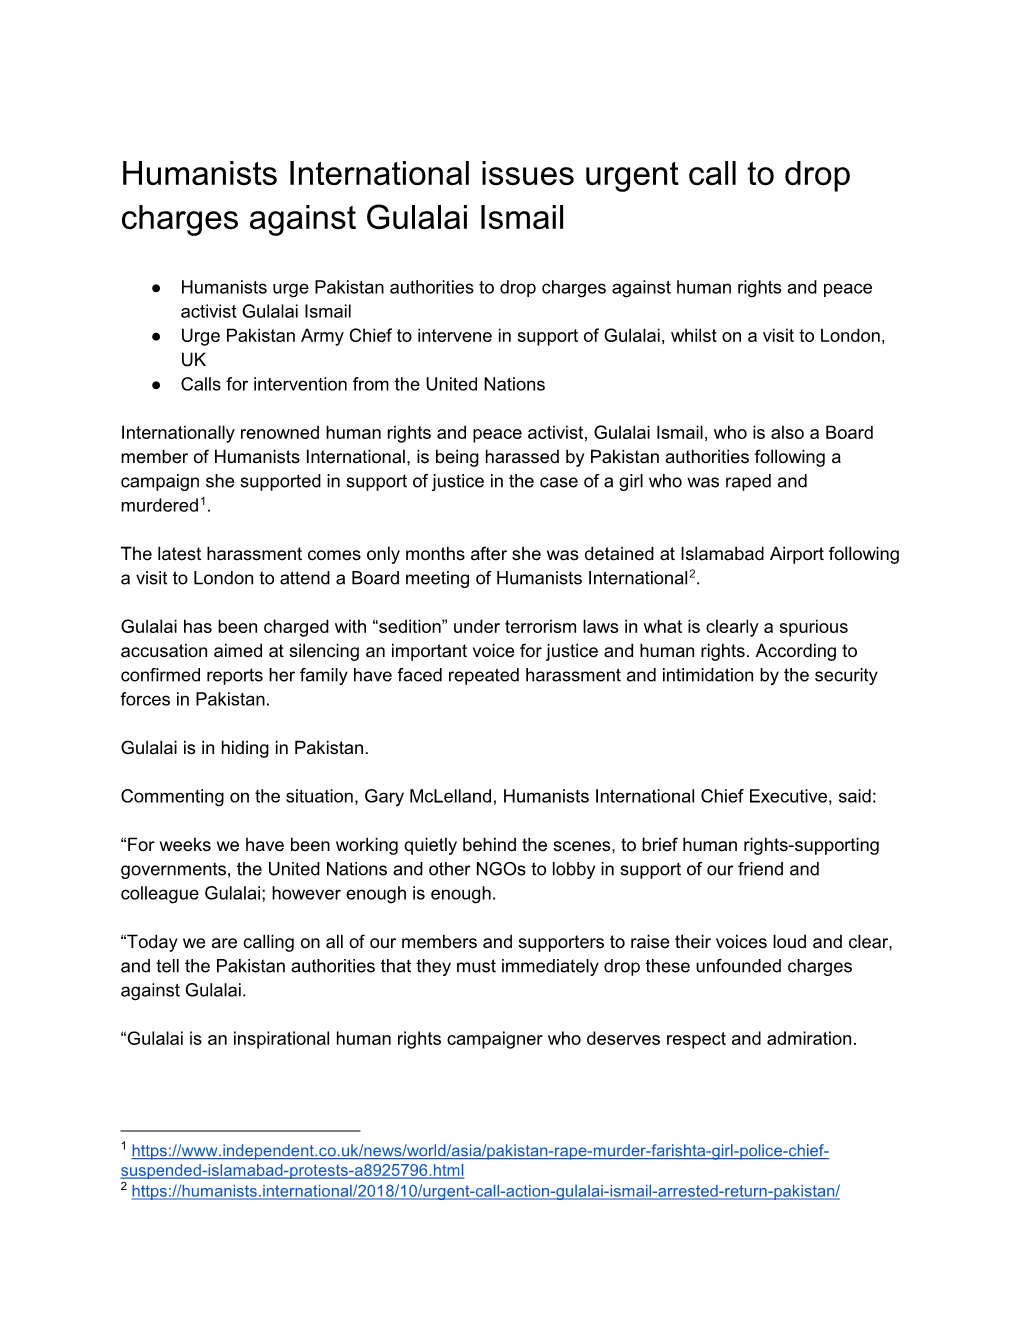 Humanists International Issues Urgent Call to Drop Charges Against Gulalai Ismail